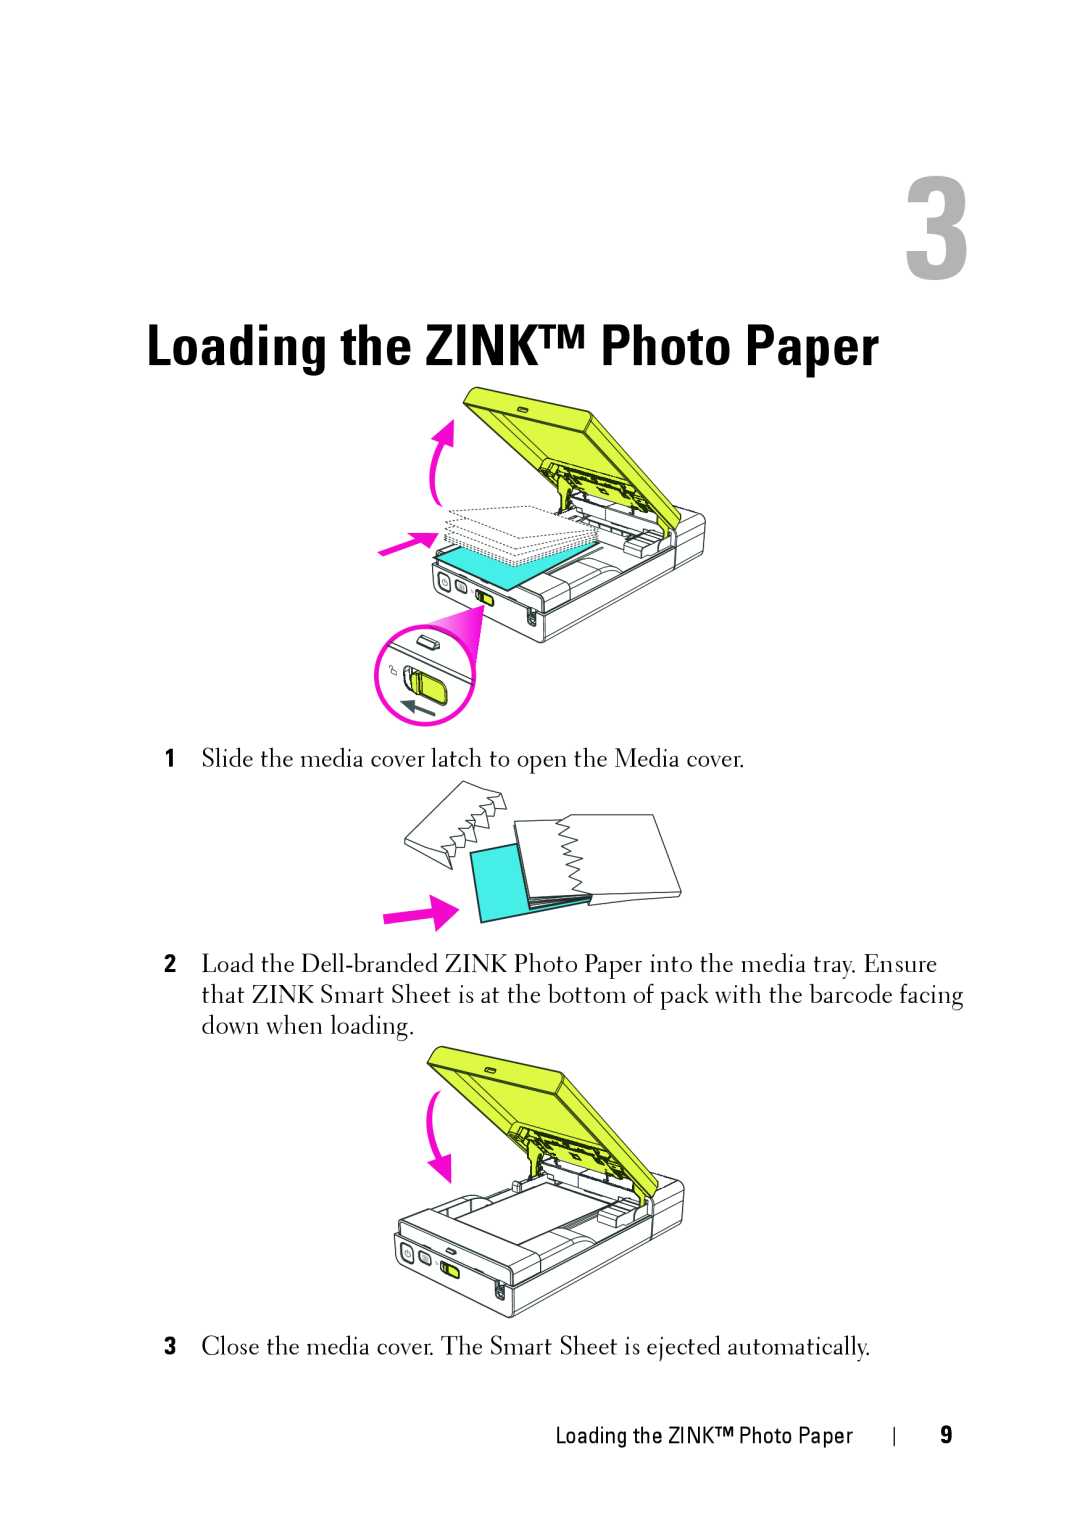 Dell PZ310 manual Loading the ZINK Photo Paper, Slide the media cover latch to open the Media cover 